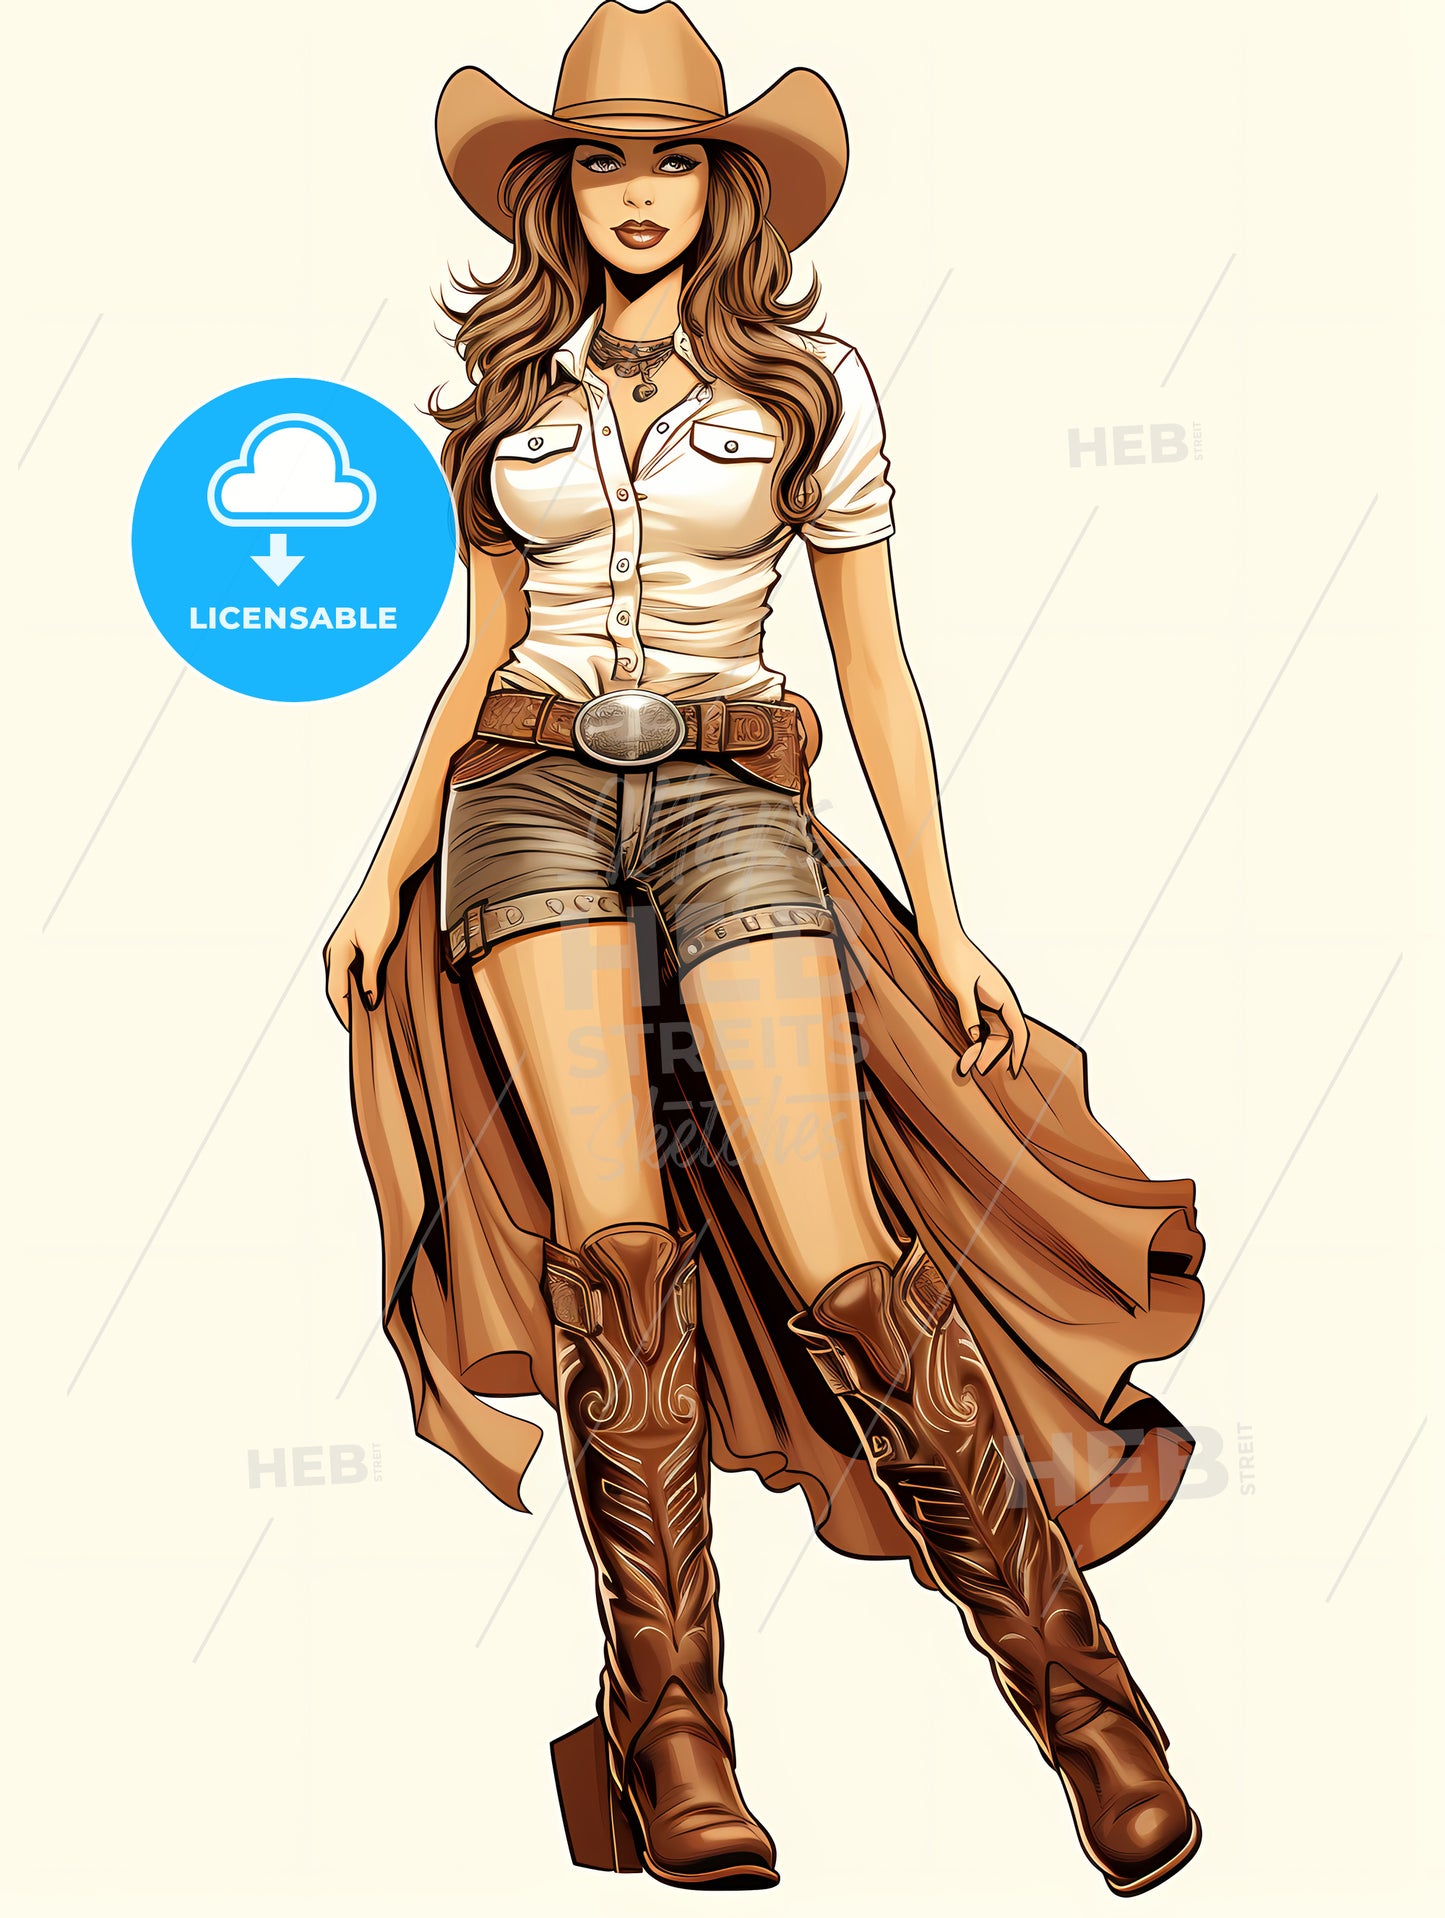 Woman In Cowboy Boots And A White Shirt